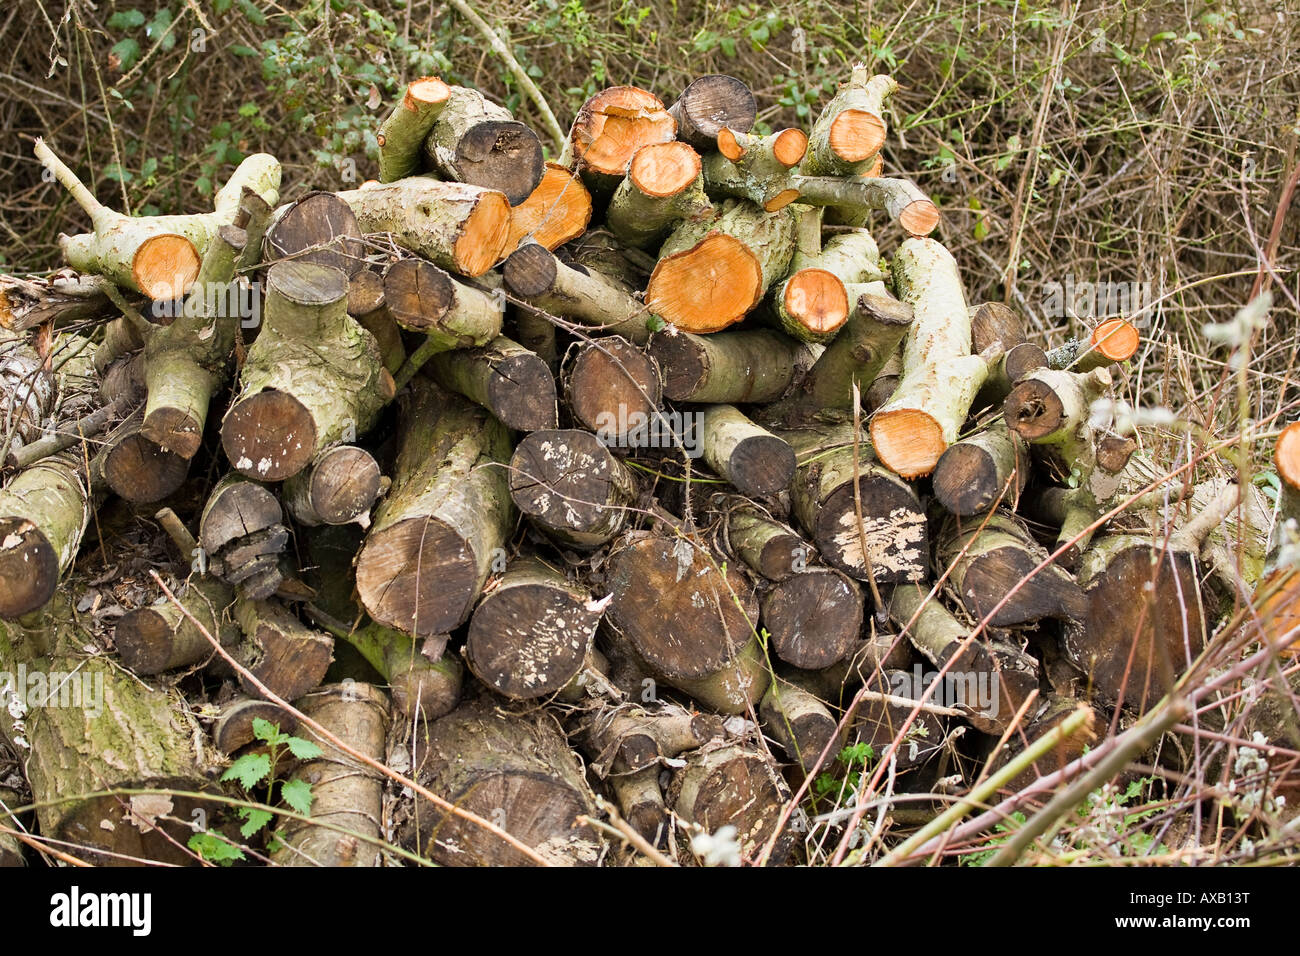 Sawn logs put in a pile to create a wildlife habitat in garden Stock Photo